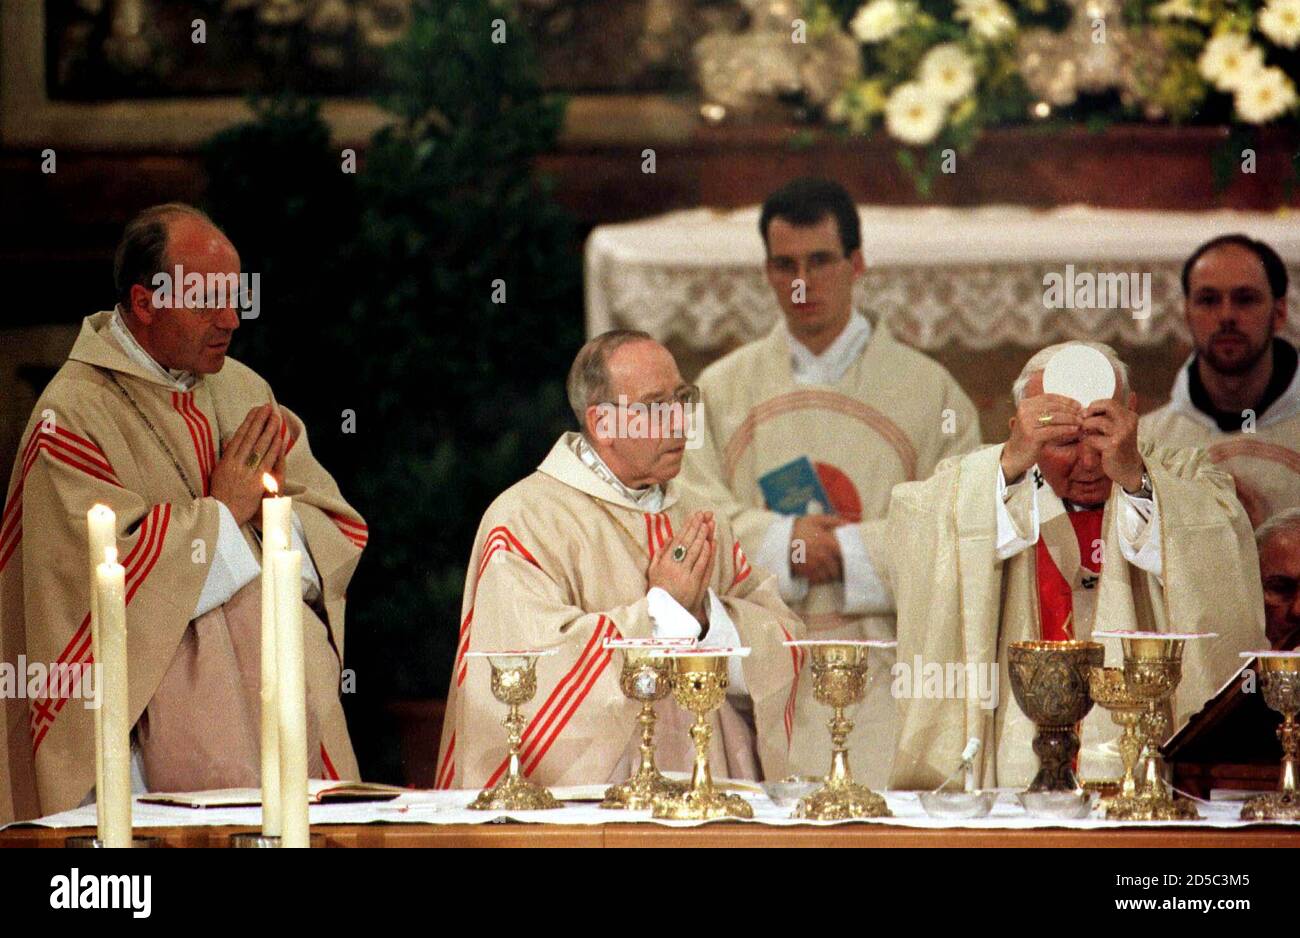 Pope John Paul II (R), Salzburg's Archbishop Georg Eder (C) and Austrian Cardinal Christoph Schoenborn (L) celebrate a holy mass in the Cathedral of Salzburg June 19. The three-day visit to Salzburg, St. Poelten and Vienna is the third by the 78-year-old pontiff to Austria and the 83rd foreign trip in his 20-year reign.  LF/FMS Stock Photo